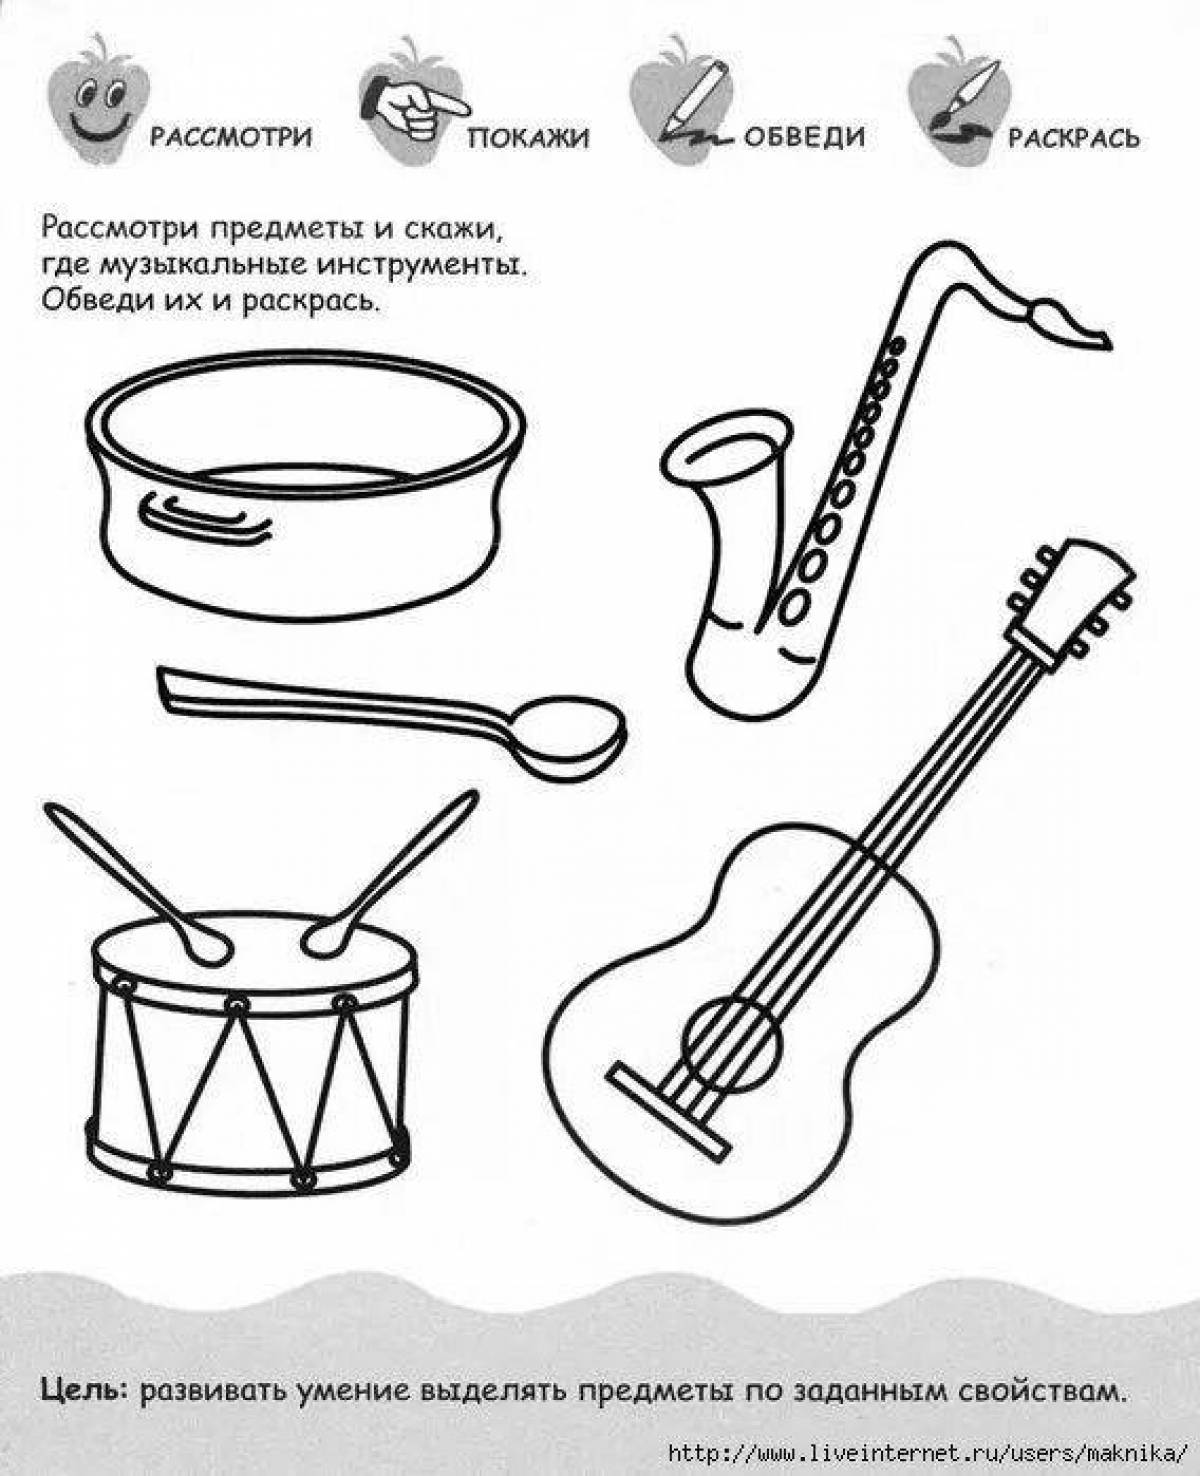 Musical instruments for children 6 7 years old #9